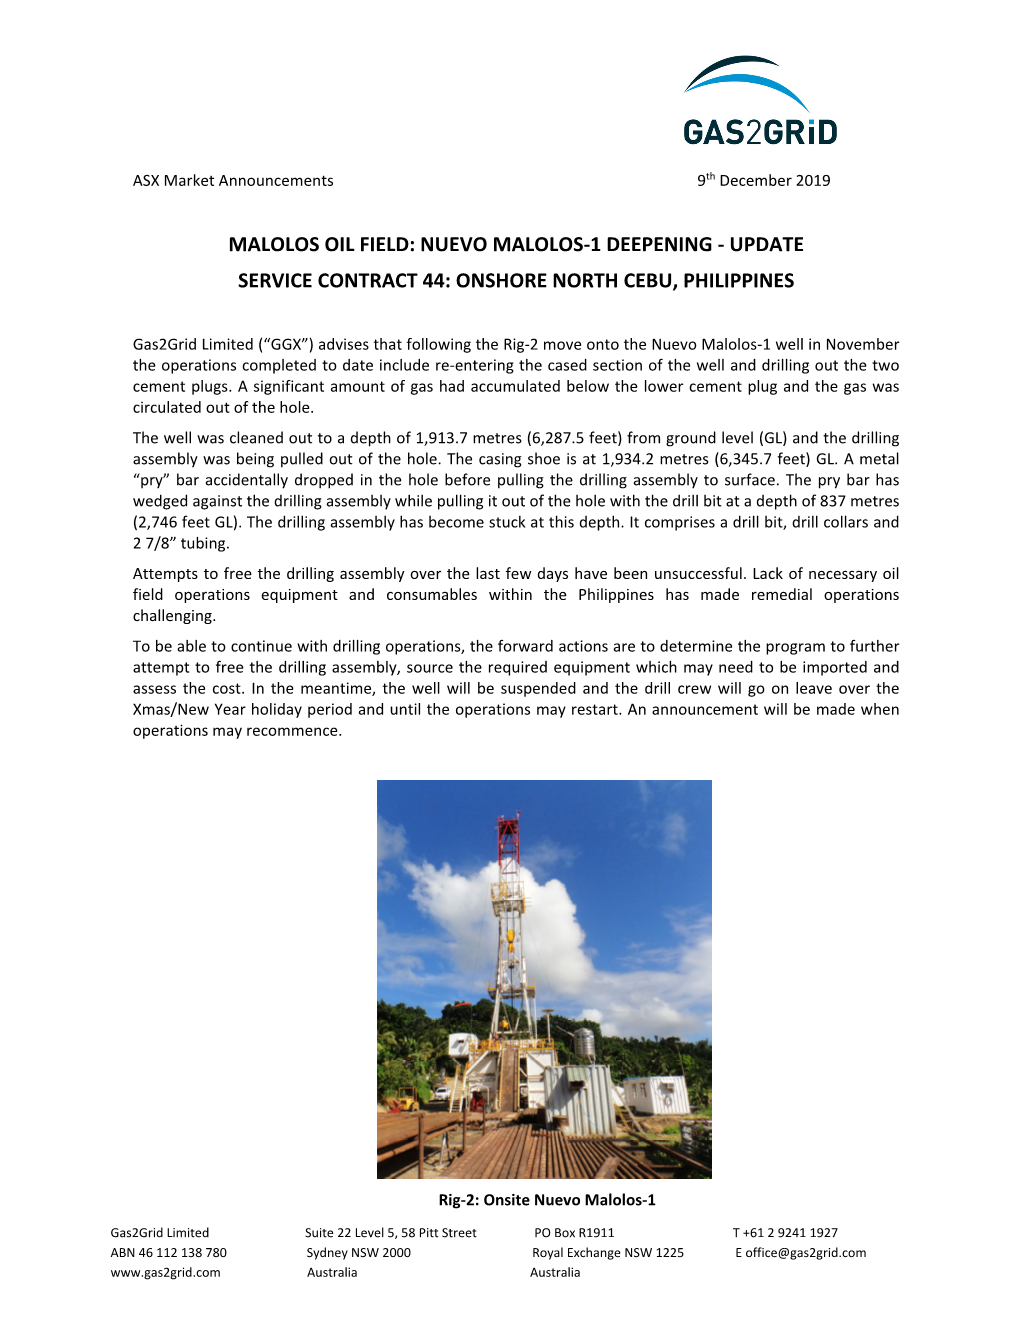 Malolos Oil Field: Nuevo Malolos‐1 Deepening ‐ Update Service Contract 44: Onshore North Cebu, Philippines